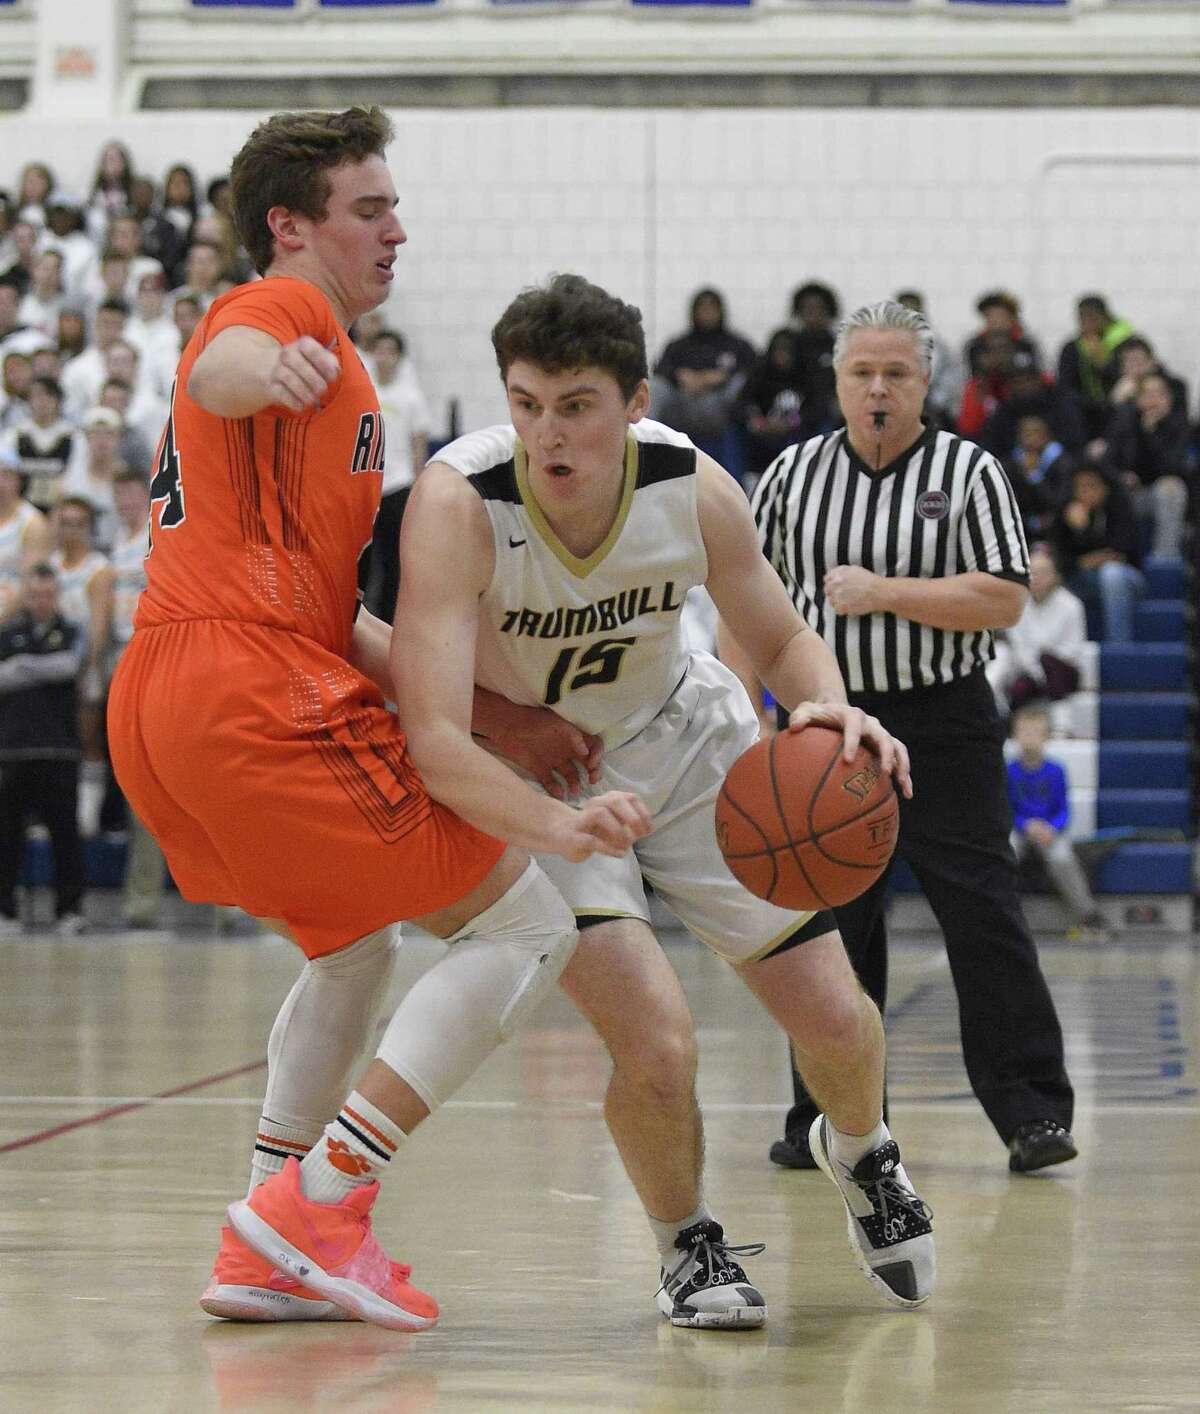 Ridgefield defeated Trumbull 73-66 in a FCIAC semifinal boys basketball game at Wilton High School on Tuesday, Feb. 26, 2019 in Wilton, Connecticut.